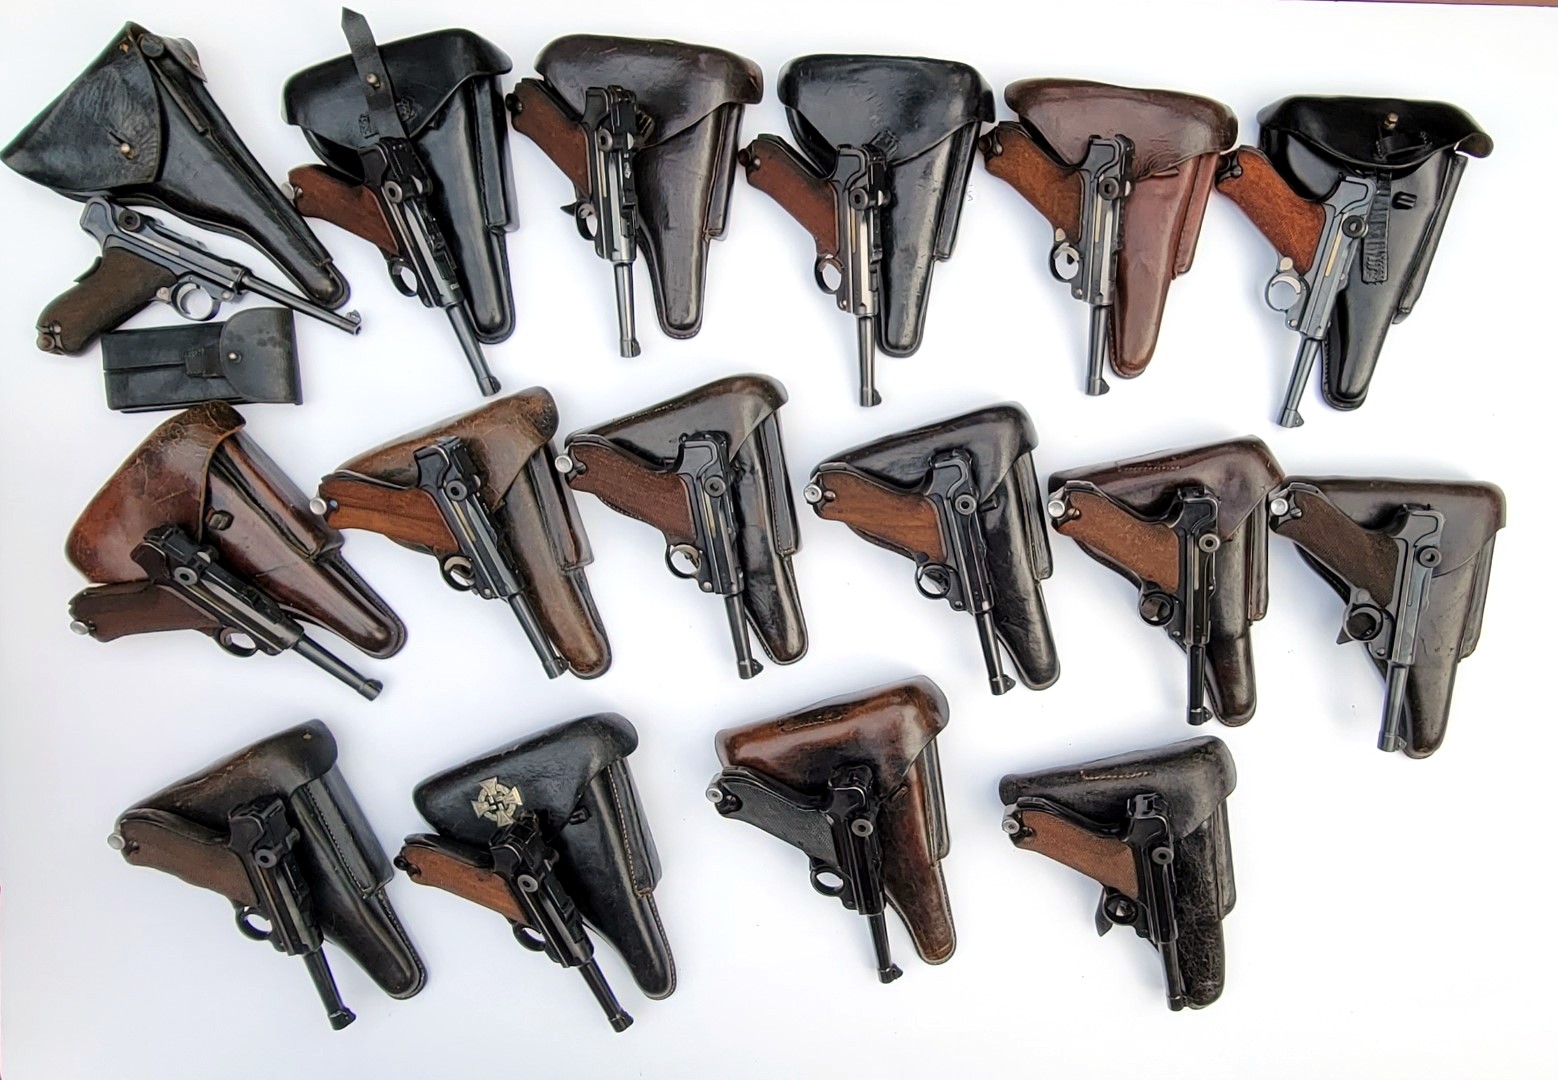 A fine collection of German Lugers coming soon.